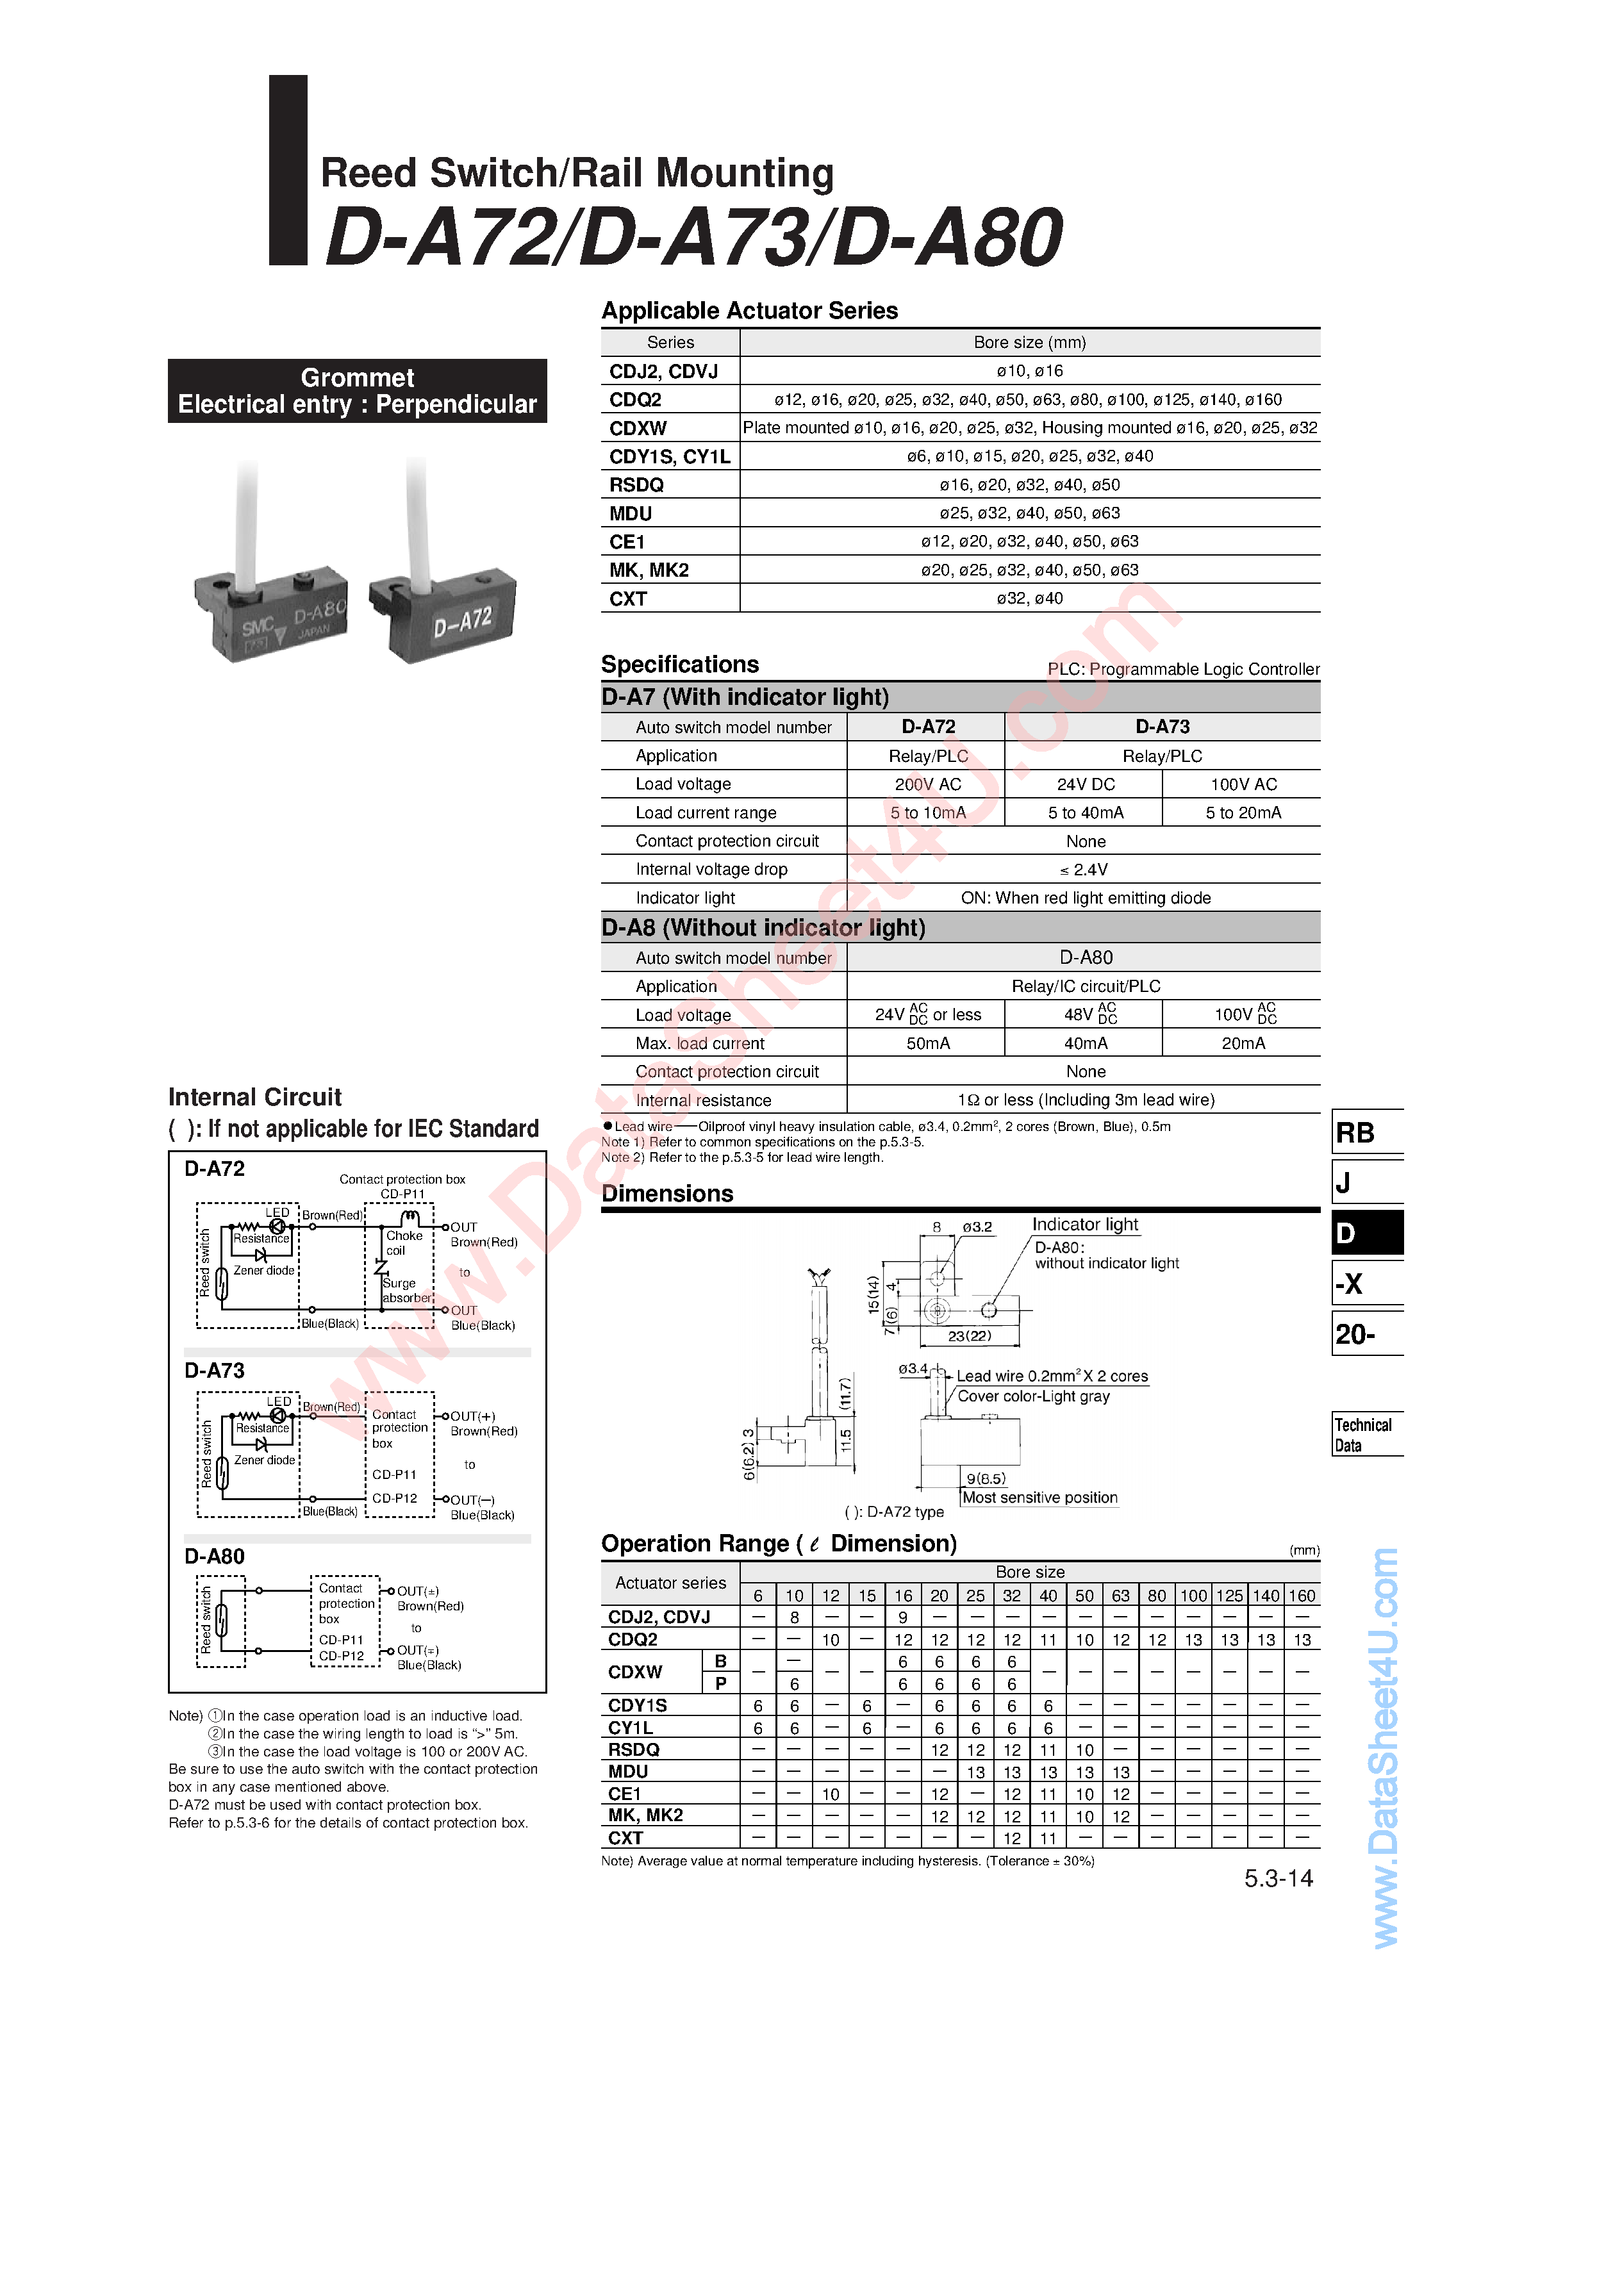 Datasheet D-A72 - (D-A72 / D-A73 / D-A80) Reed Switch / Rail Mounting page 1